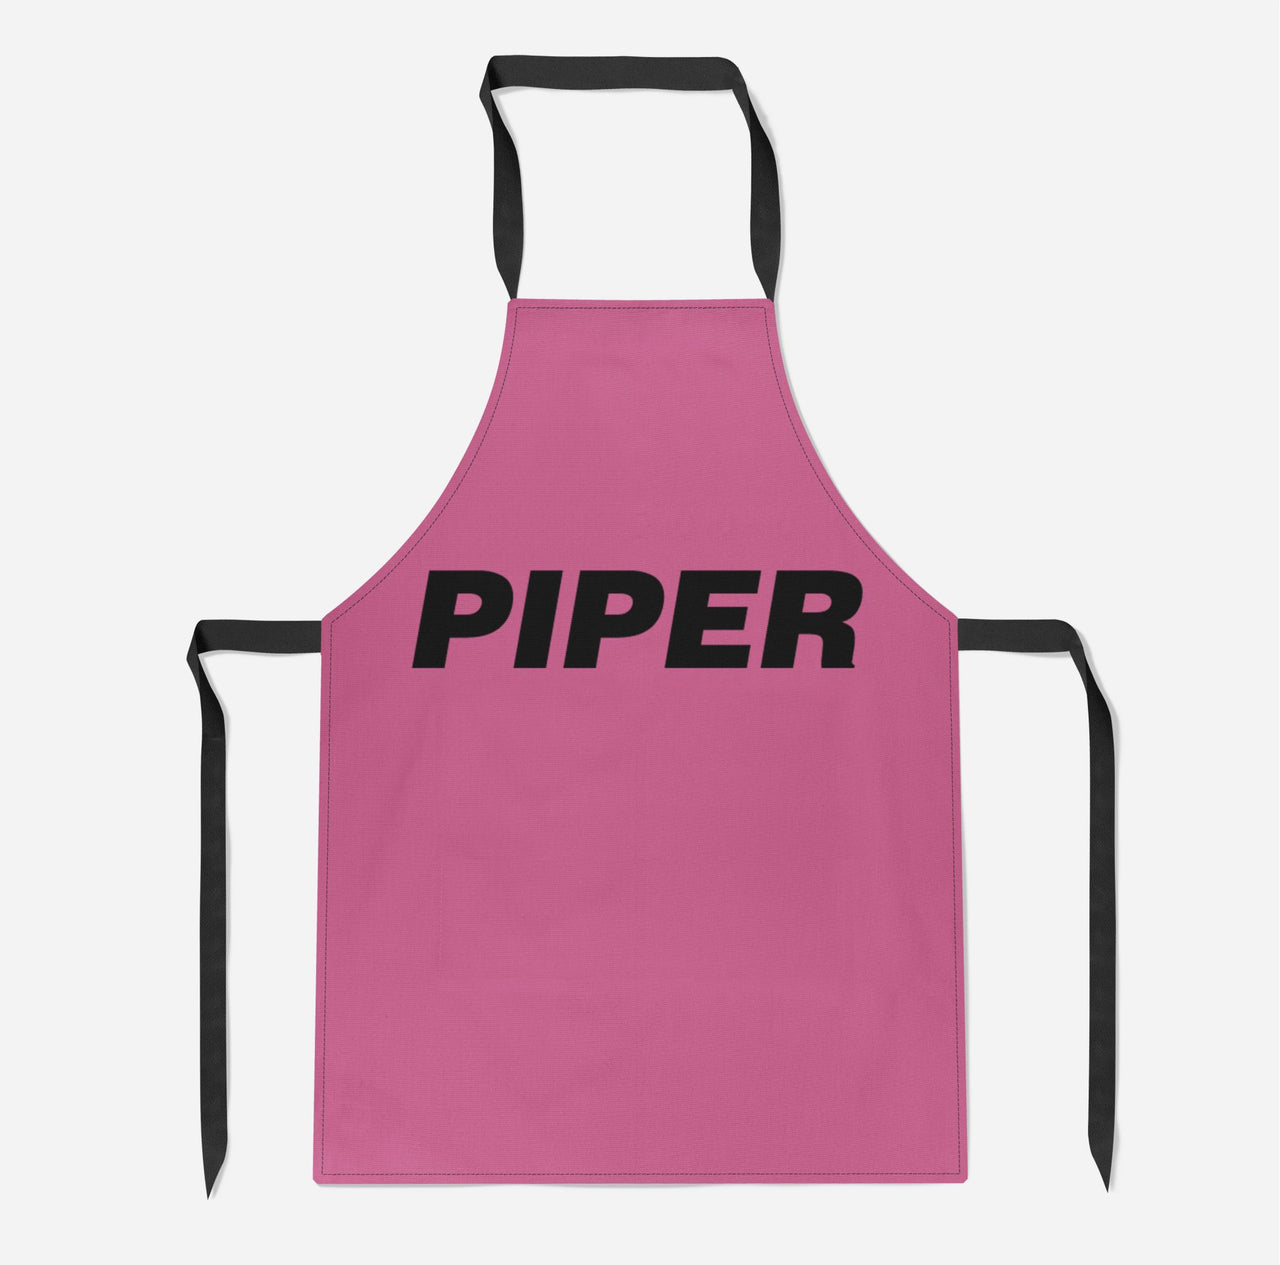 Piper & Text Designed Kitchen Aprons